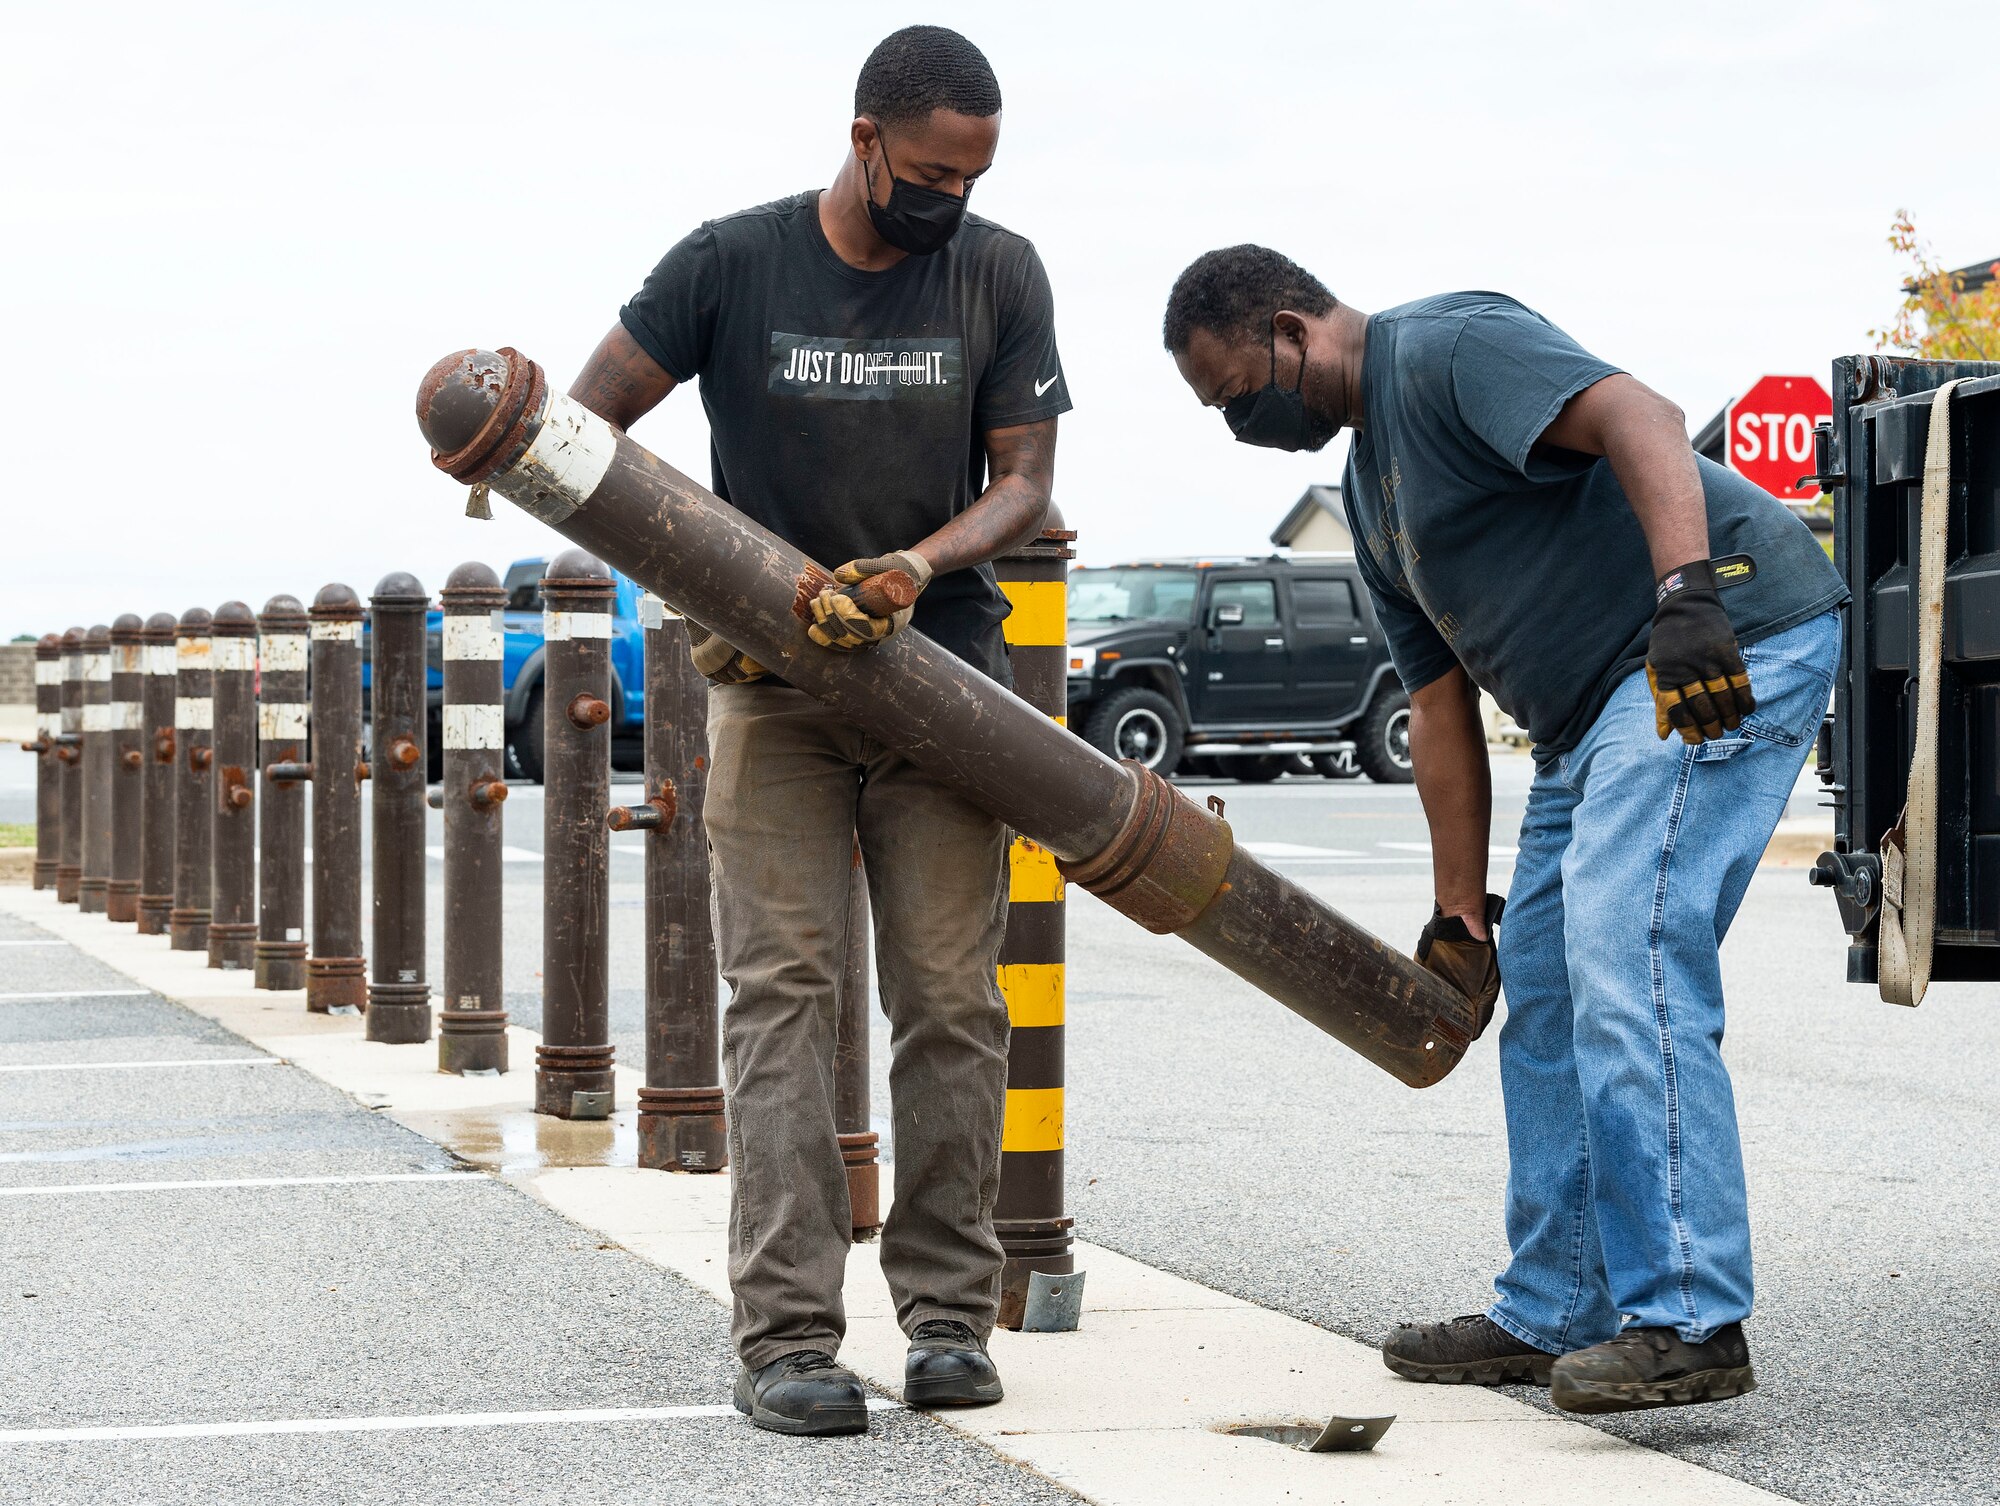 From the left, Kevonte Jackson and Earl Batten, both from the 436th Civil Engineer Squadron horizontal shop, install bollards during a Force Protection Major Accident Response Exercise at Dover Air Force Base, Delaware, Oct. 6, 2021. The three-day exercise tested the response capabilities of Team Dover through various scenarios in an effort to strengthen their ability to provide rapid-global mobility in challenging conditions. (U.S. Air Force photo by Roland Balik)